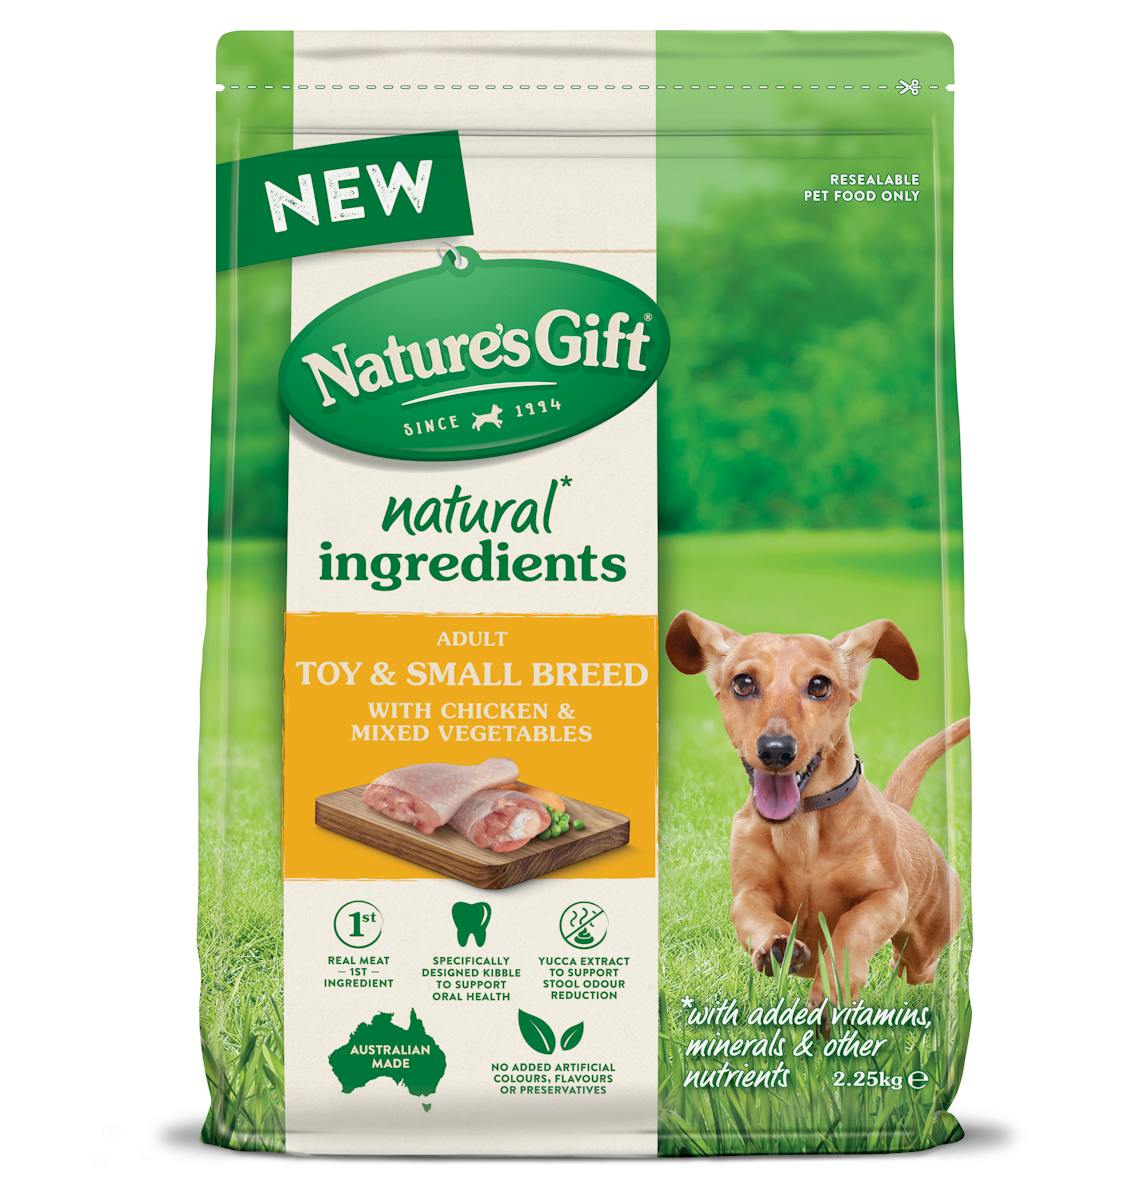 Nature's Gift Toy & Small Breed with Chicken & Mixed